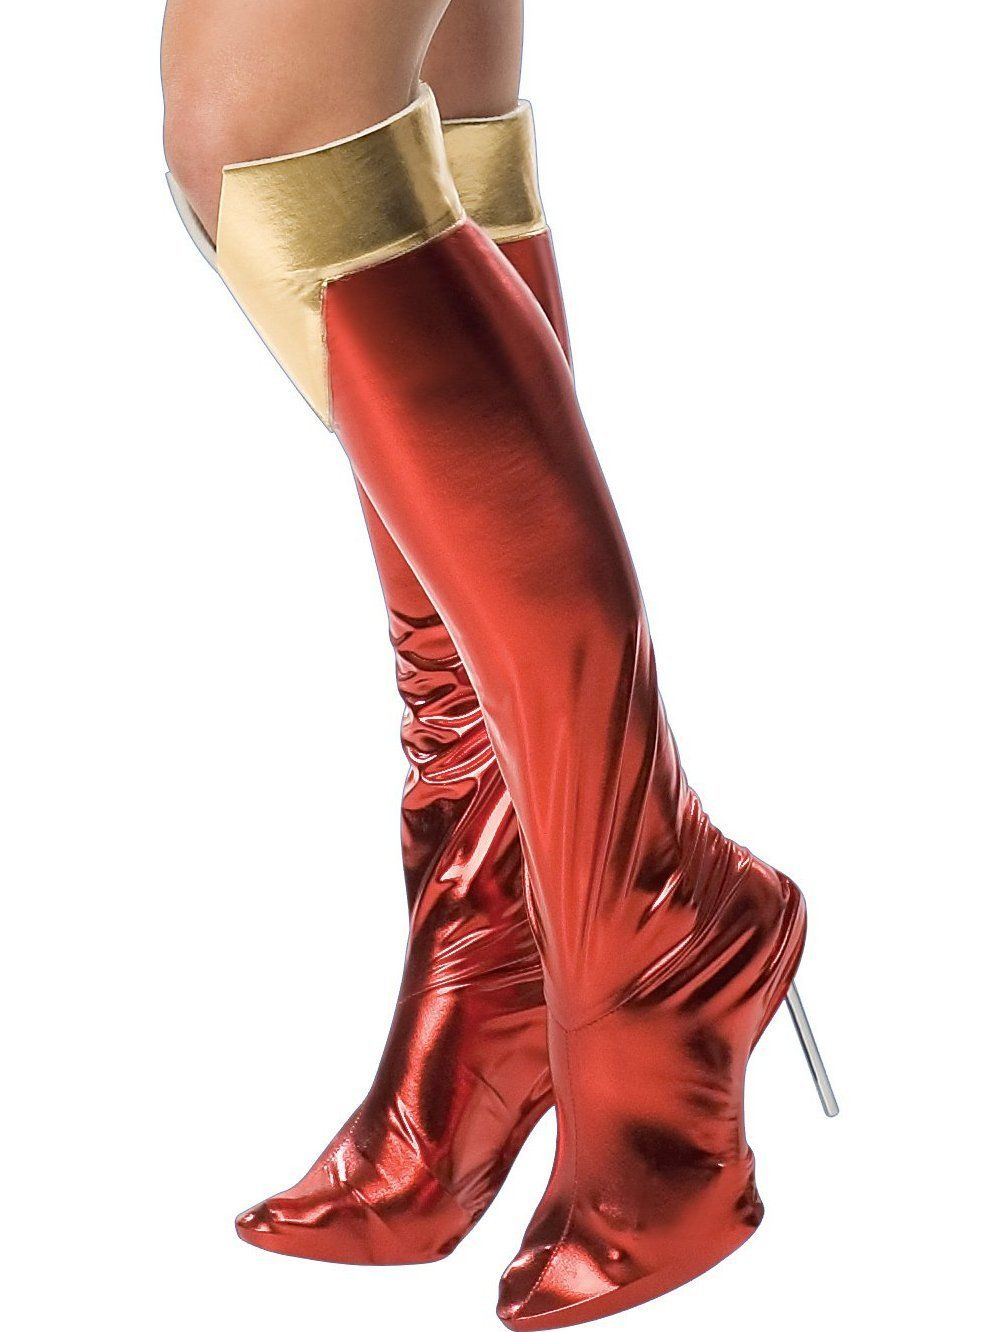 LADIES SUPERGIRL WOMAN  HERO SUPER WONDER  FANCY DRESS COSTUME BOOT COVERS ONLY 